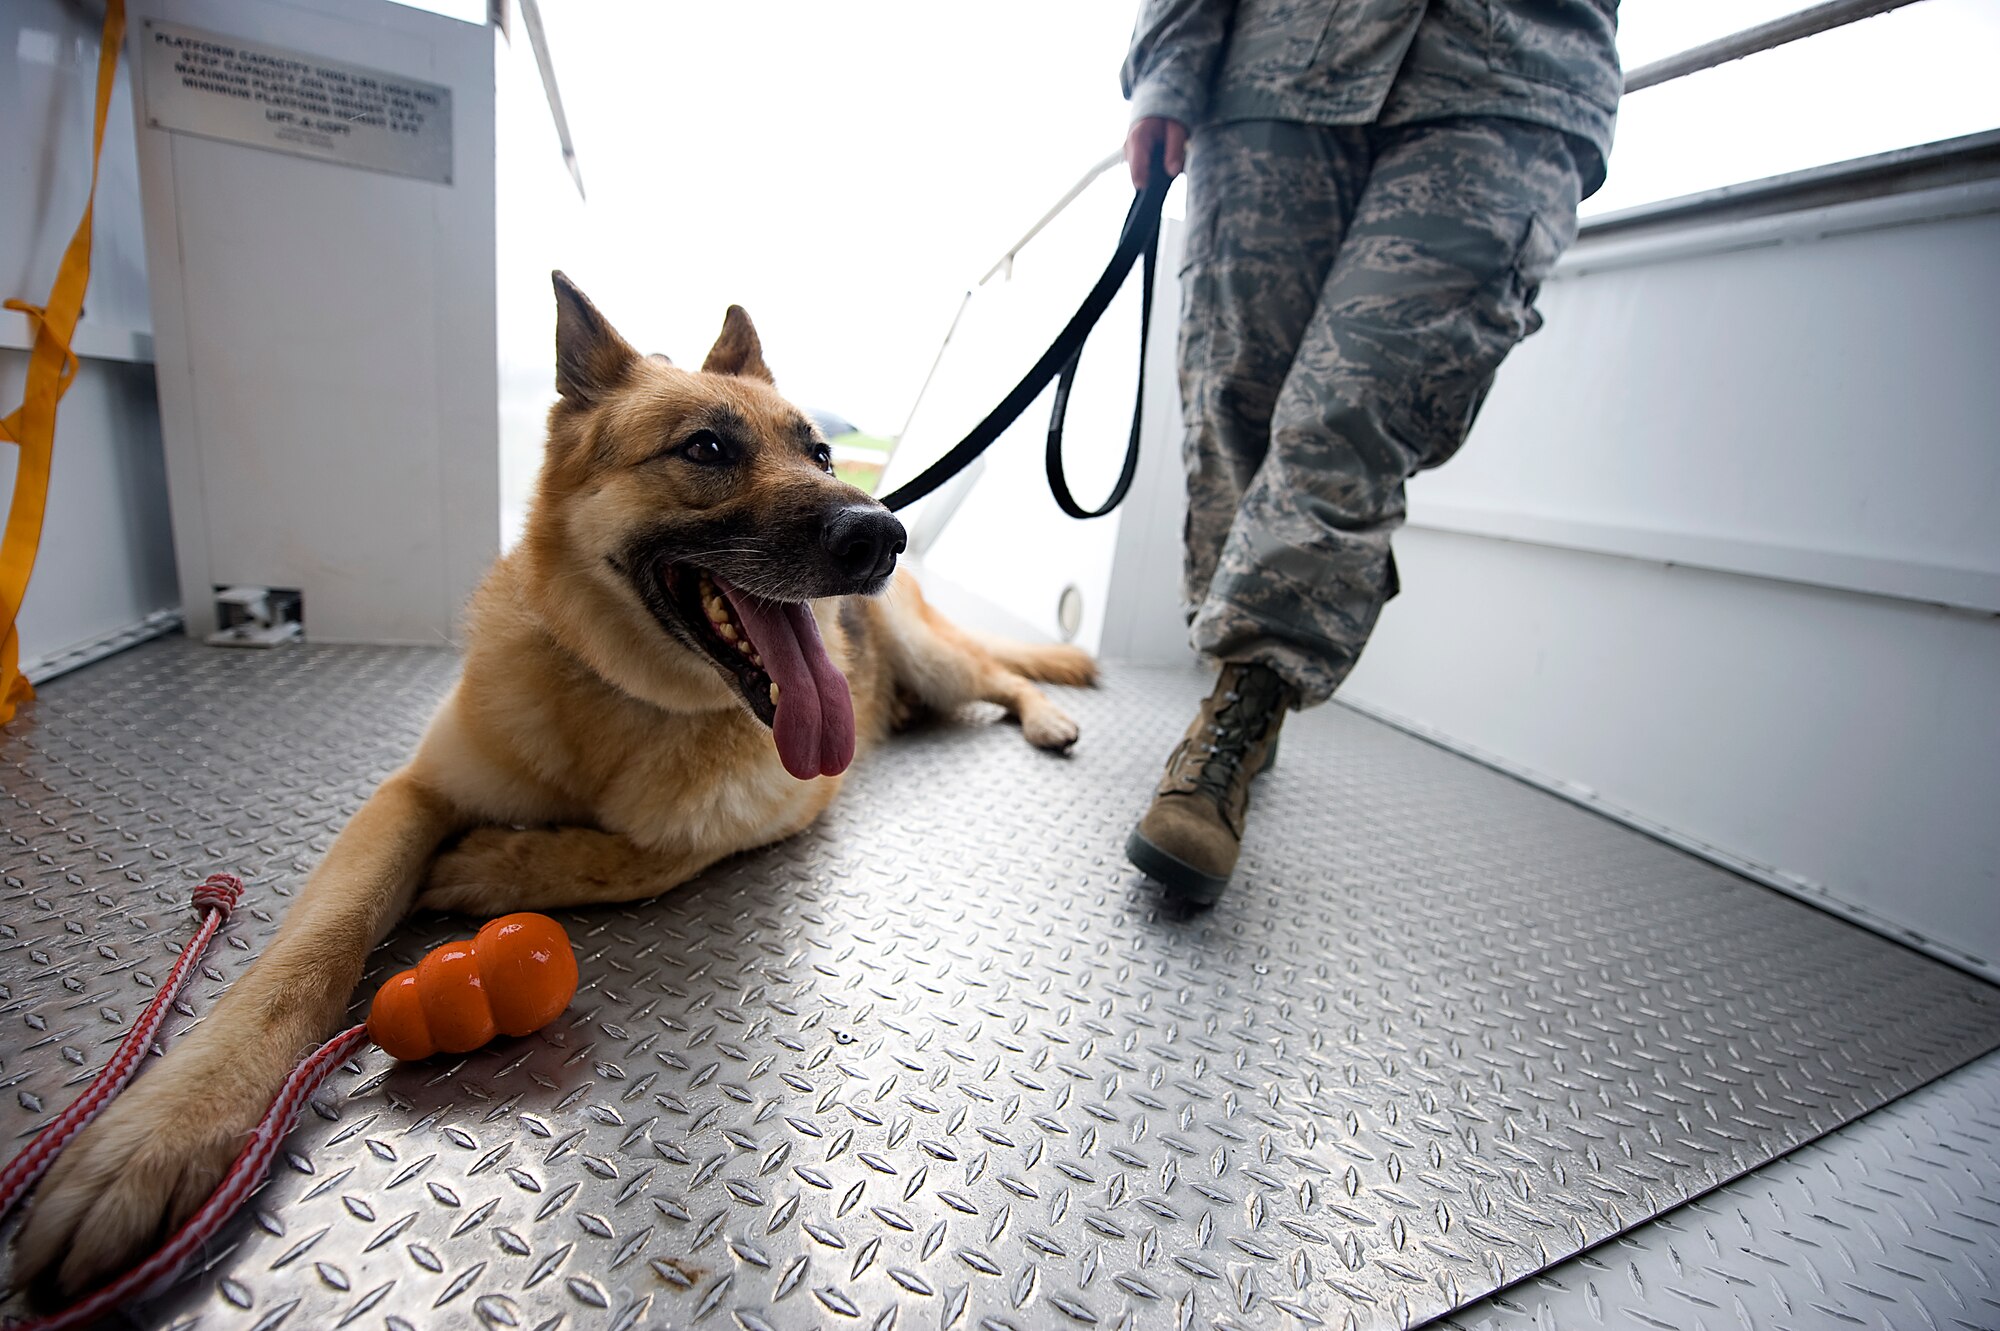 U.S. Air Force Military Working Dog Zina rests on a set of aircraft stairs following a training search of a U.S. Air Force KC-135 Stratotanker refueling aircraft on the Kadena Air Base, Japan, flightline May 16, 2013. Zina is one of four MWDs who retired from the Air Force June 13. During her service, Zina alone has conducted 16,300 detector sweeps. (U.S. Air Force photo by Senior Airman Maeson L. Elleman/Released)